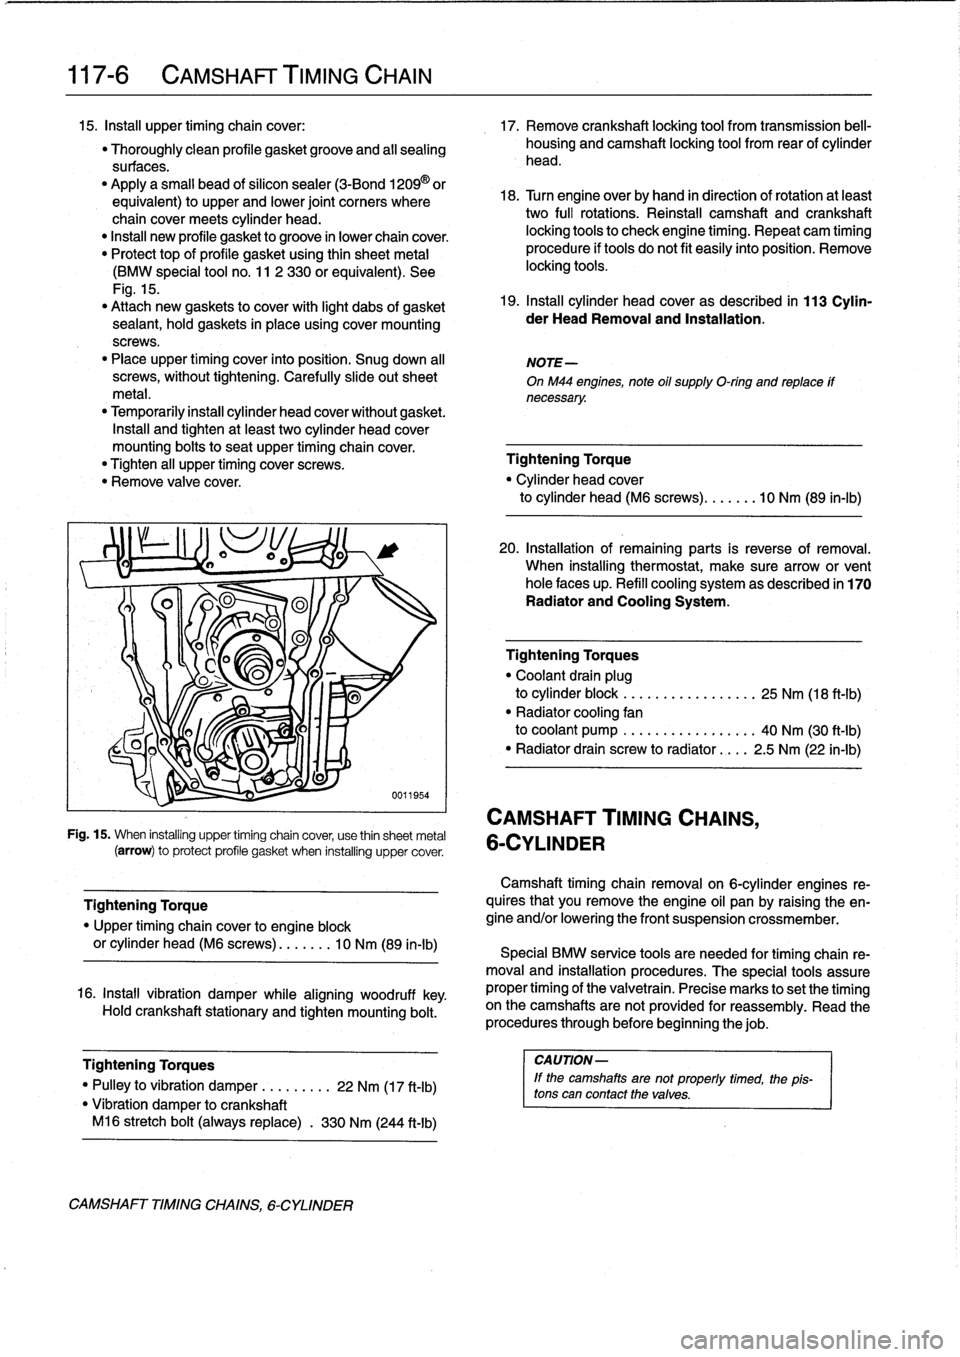 BMW 328i 1994 E36 Workshop Manual 
117-
6

	

CAMSHAFT
TIMING
CHAIN

15
.
Insta¡¡
upper
timing
chaincover
:

	

17
.
Remove
crankshaft
locking
tool
from
transmission
bell-

"
Thoroughly
clean
profile
gasketgroove
and
all
sealing

	
